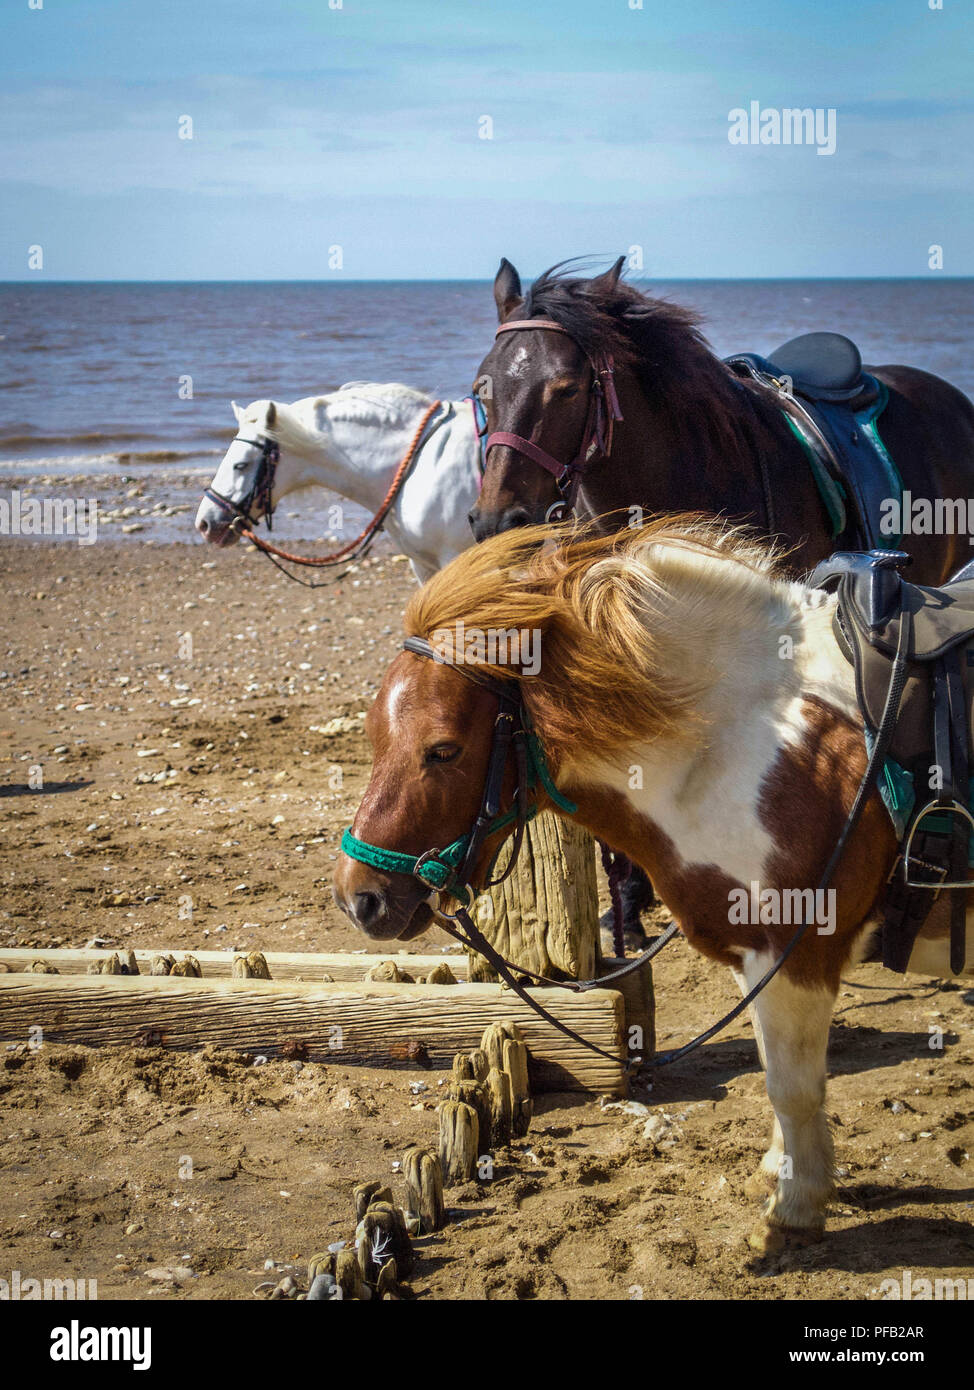 Ponies at Seaside on Windy Summer Day Stock Photo